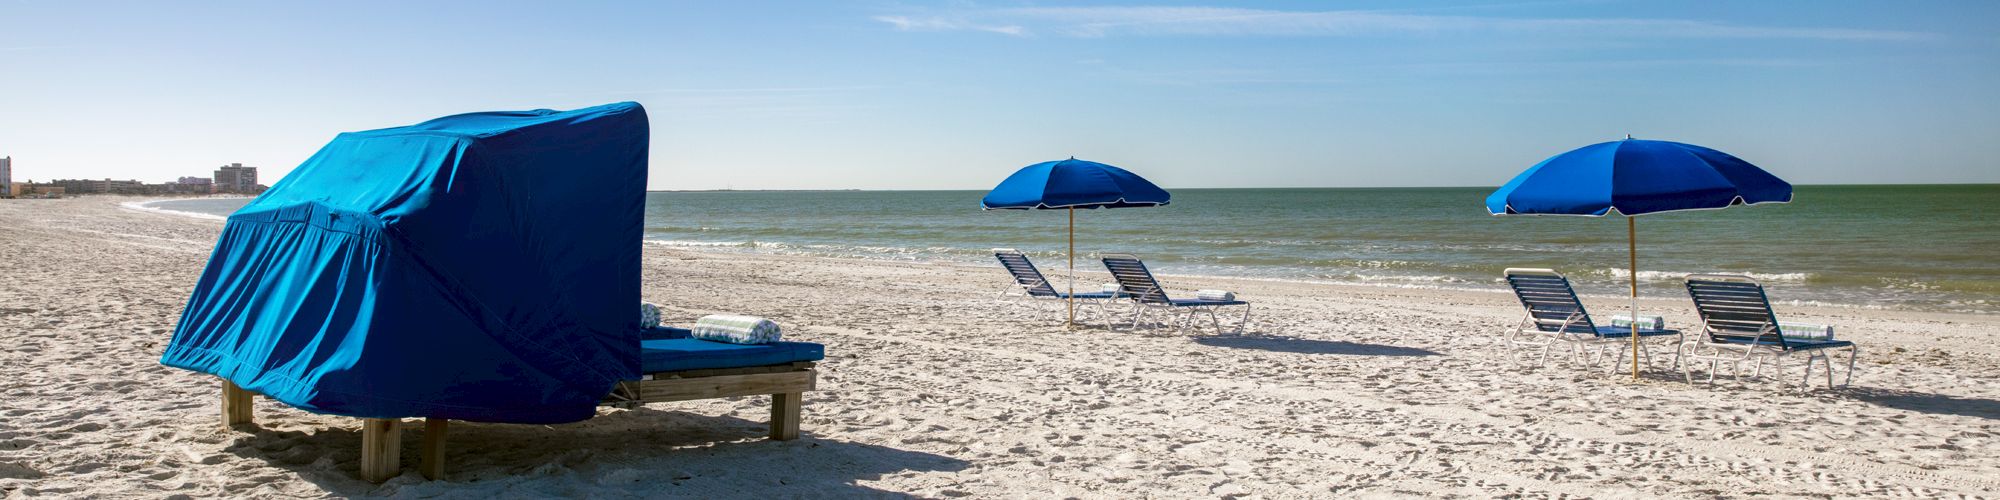 Beach scene with lounge chairs, umbrellas, and a cabana on sandy shore.